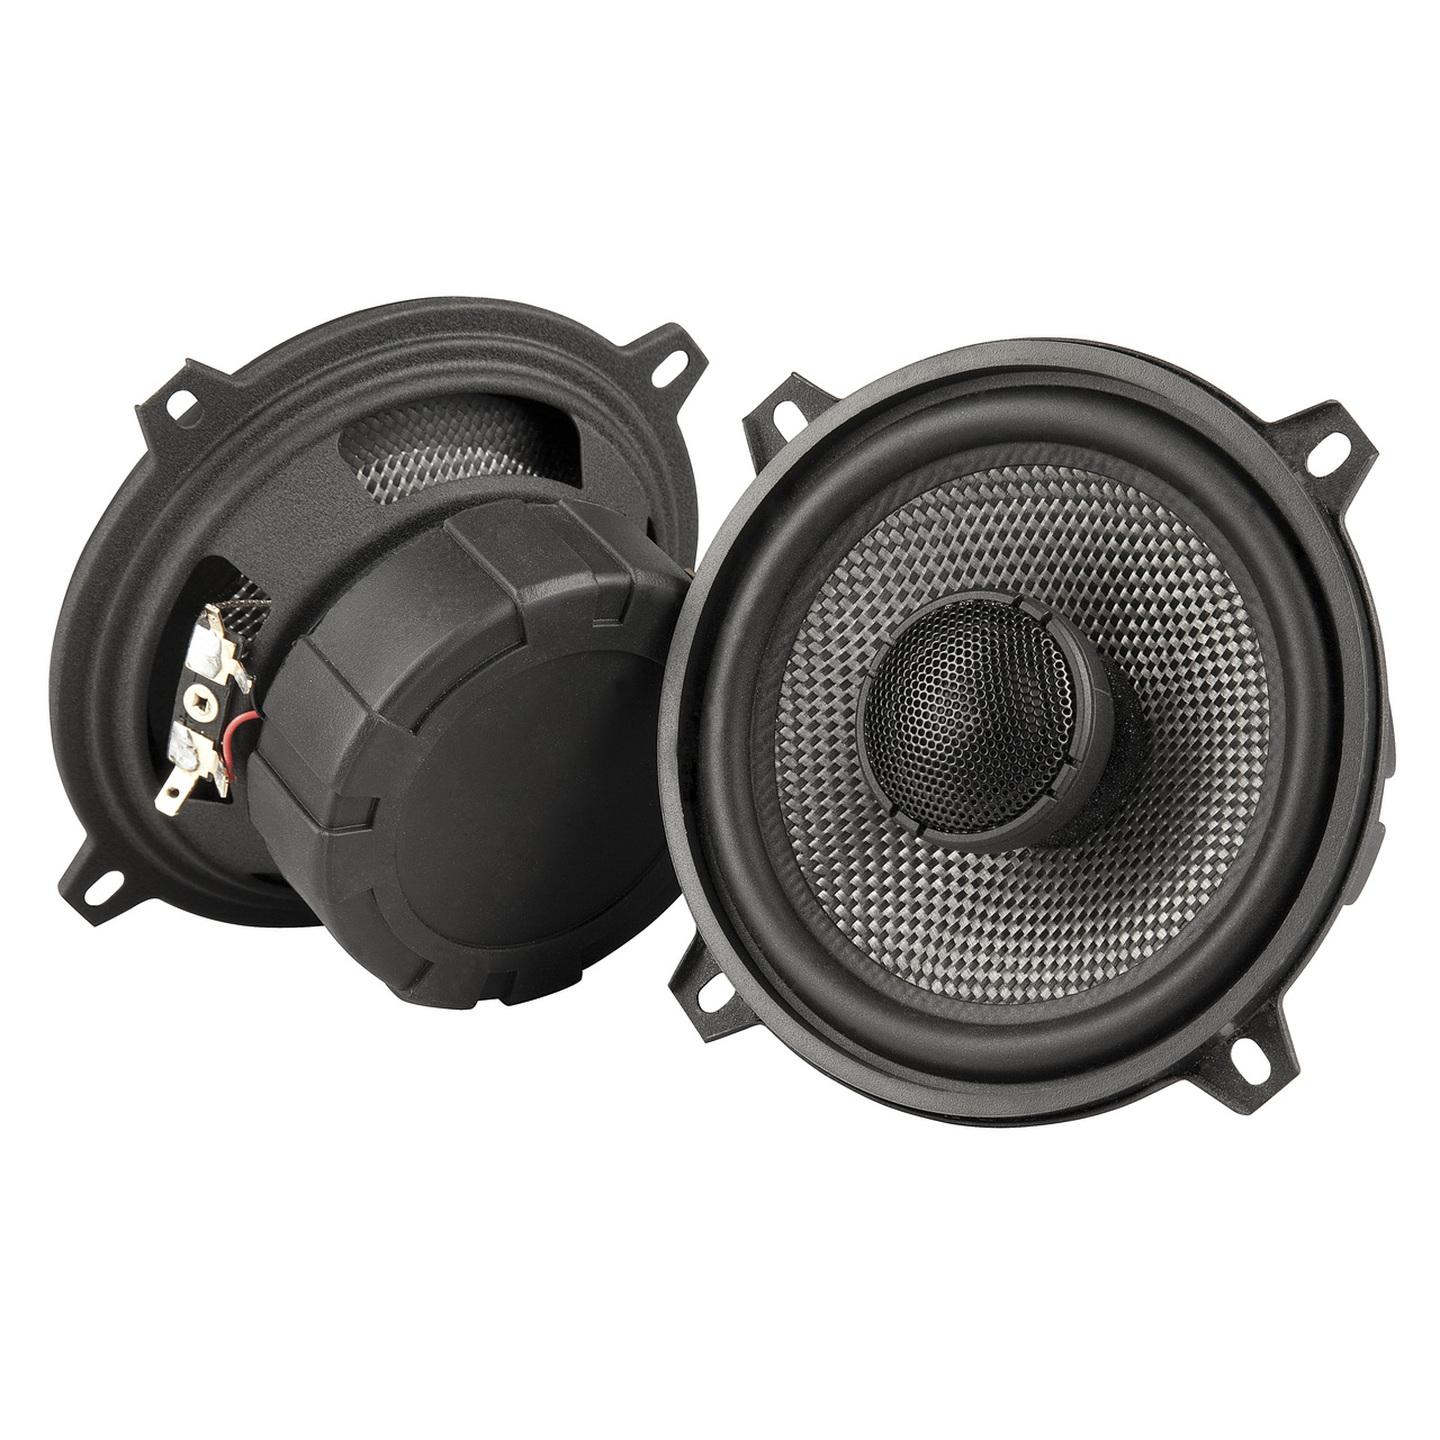 5 Inch Coaxial Speaker with Silk Dome Tweeter made with Kevlar